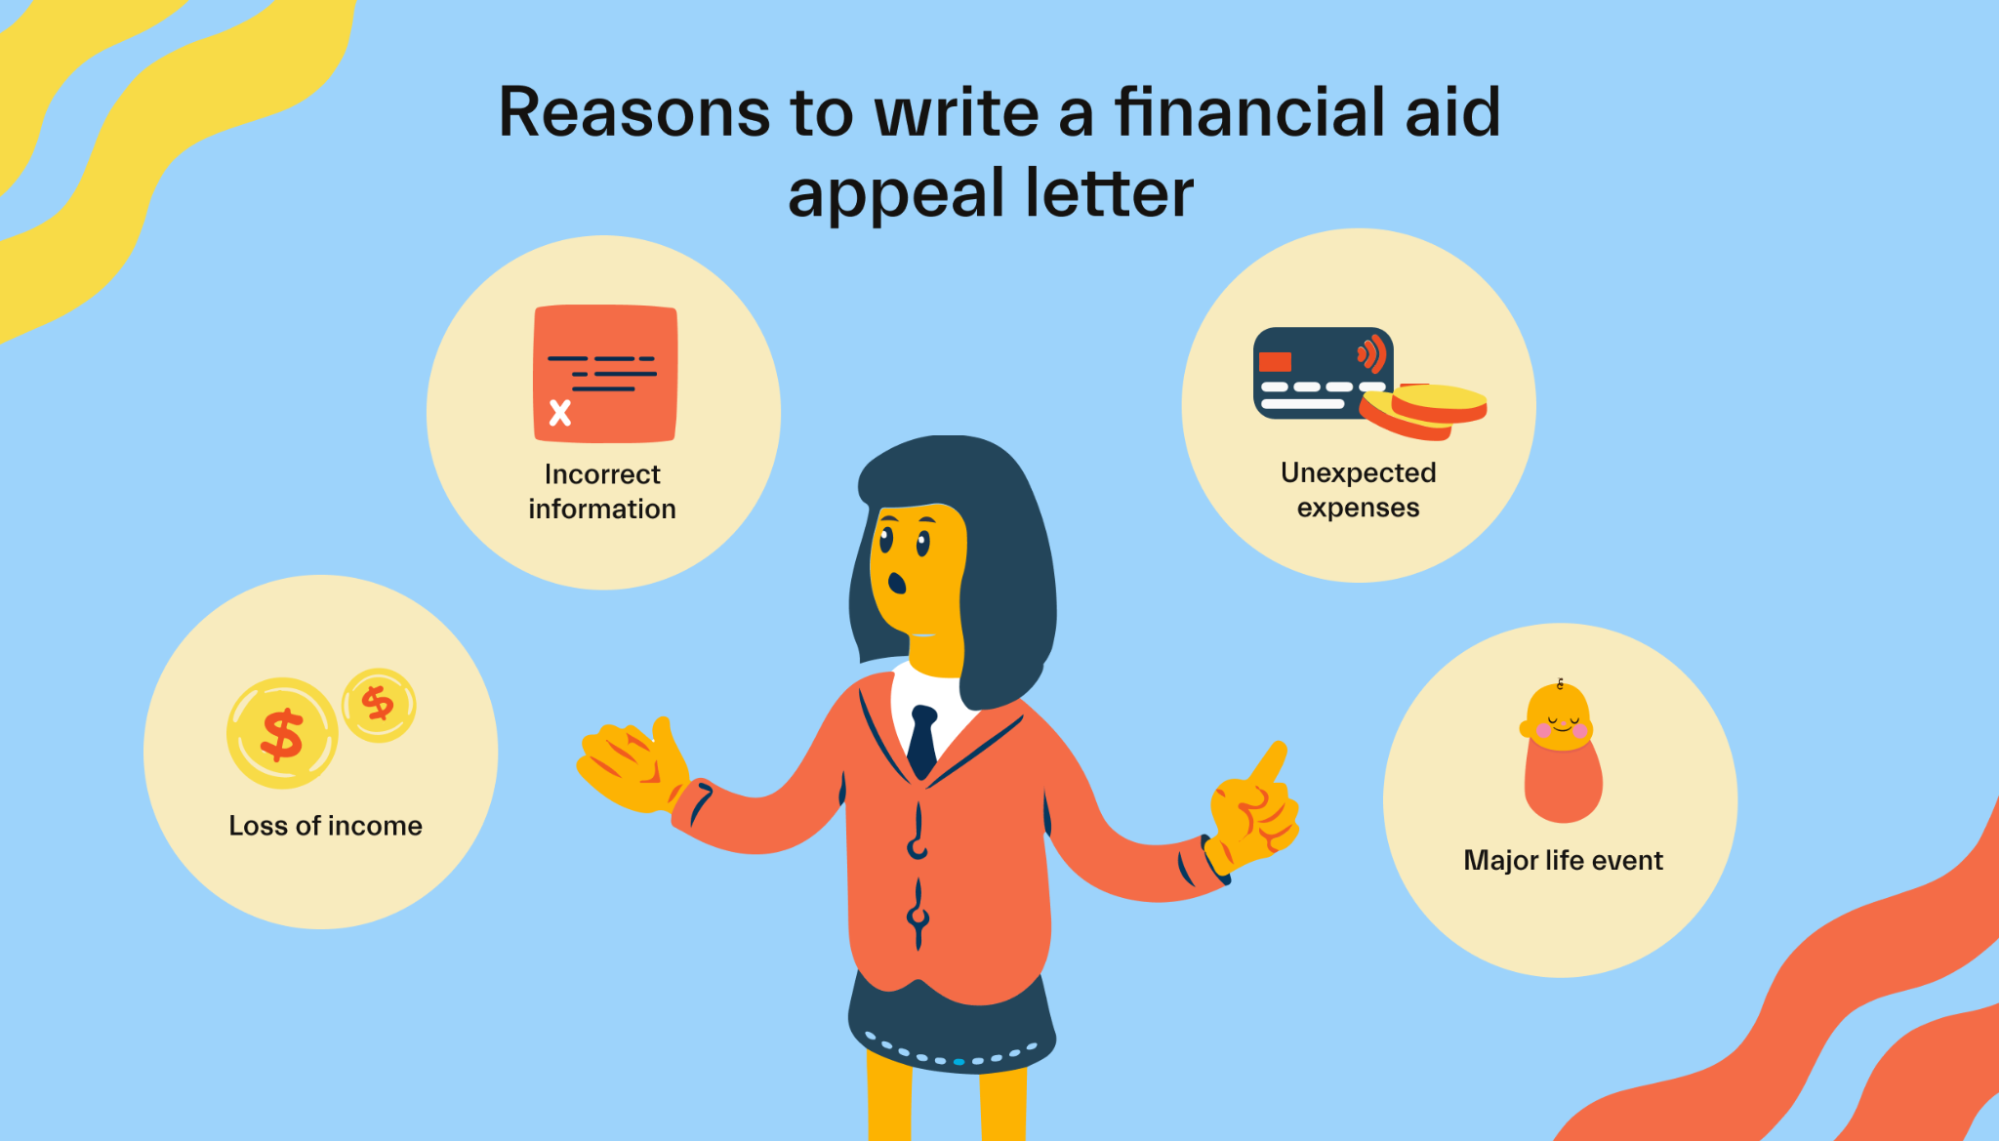  Reasons to write a financial aid appeal letter